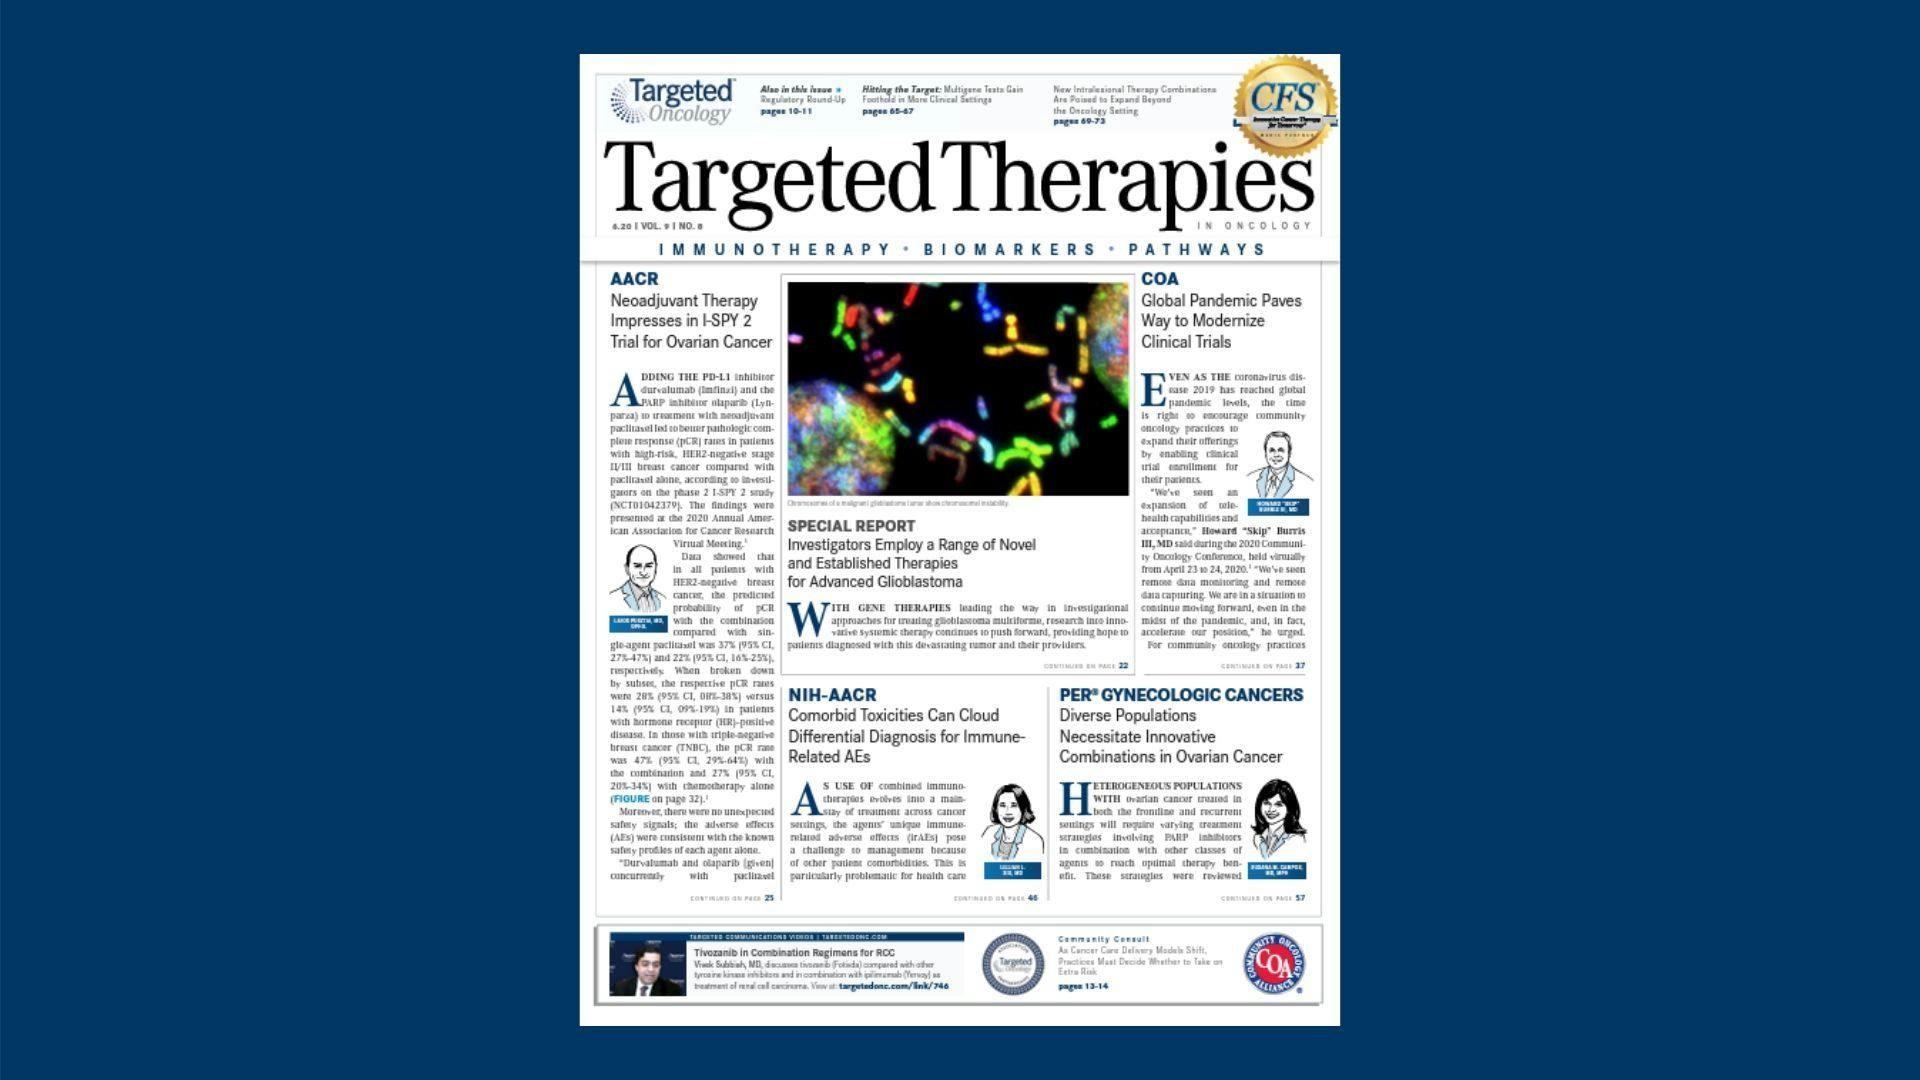 Neoadjuvant Therapy Impresses in I-SPY 2 Trial for Breast Cancer